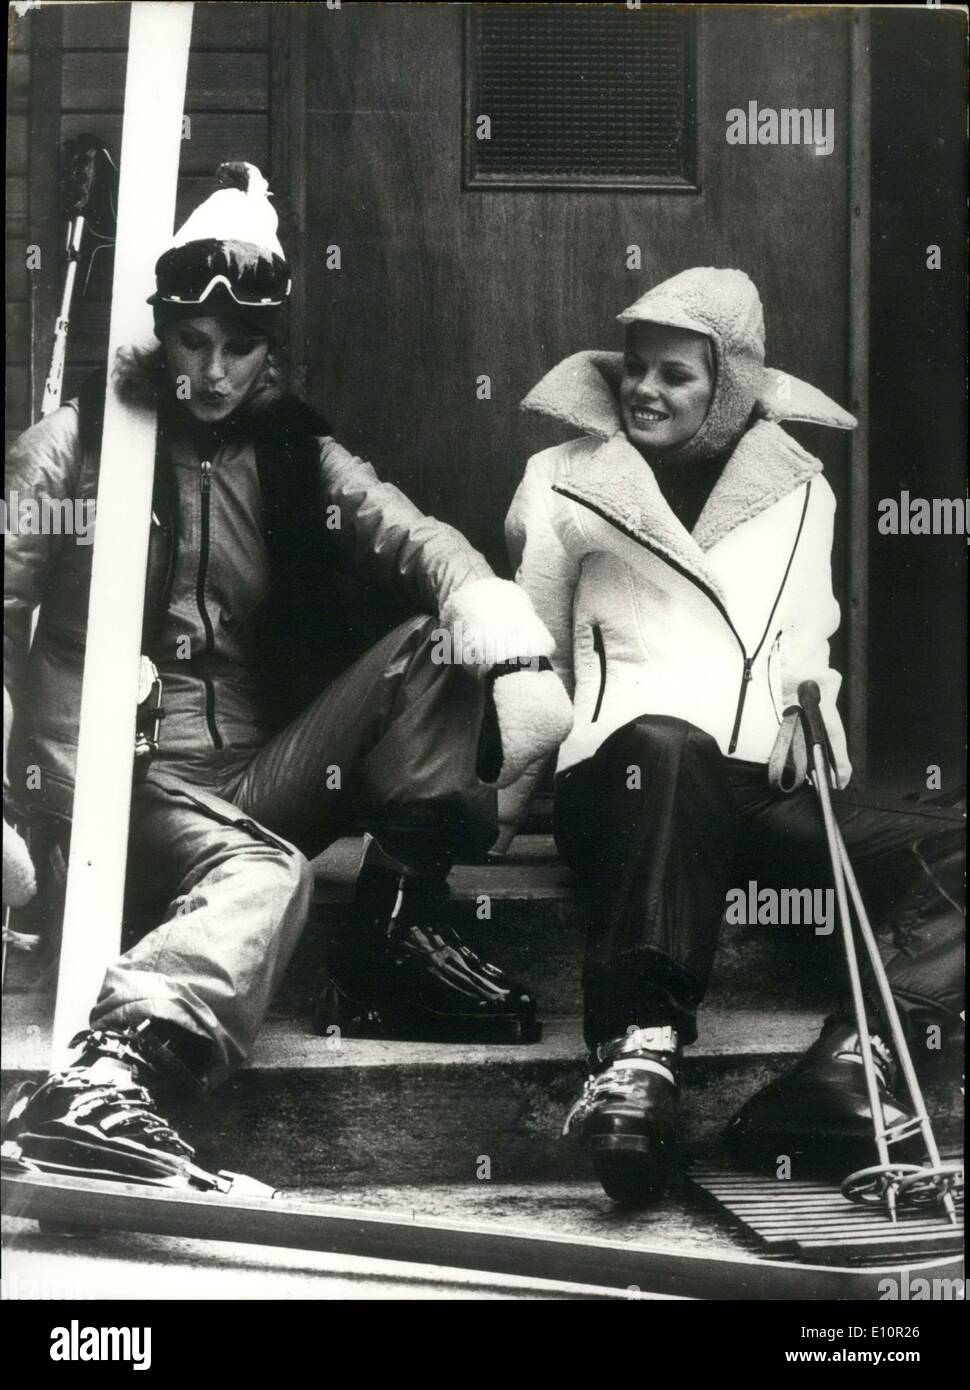 Dec. 11, 1973 - To help you keep warm while skiing the slopes, designers Airday ad Skimer came up with these ski suits. Stock Photo